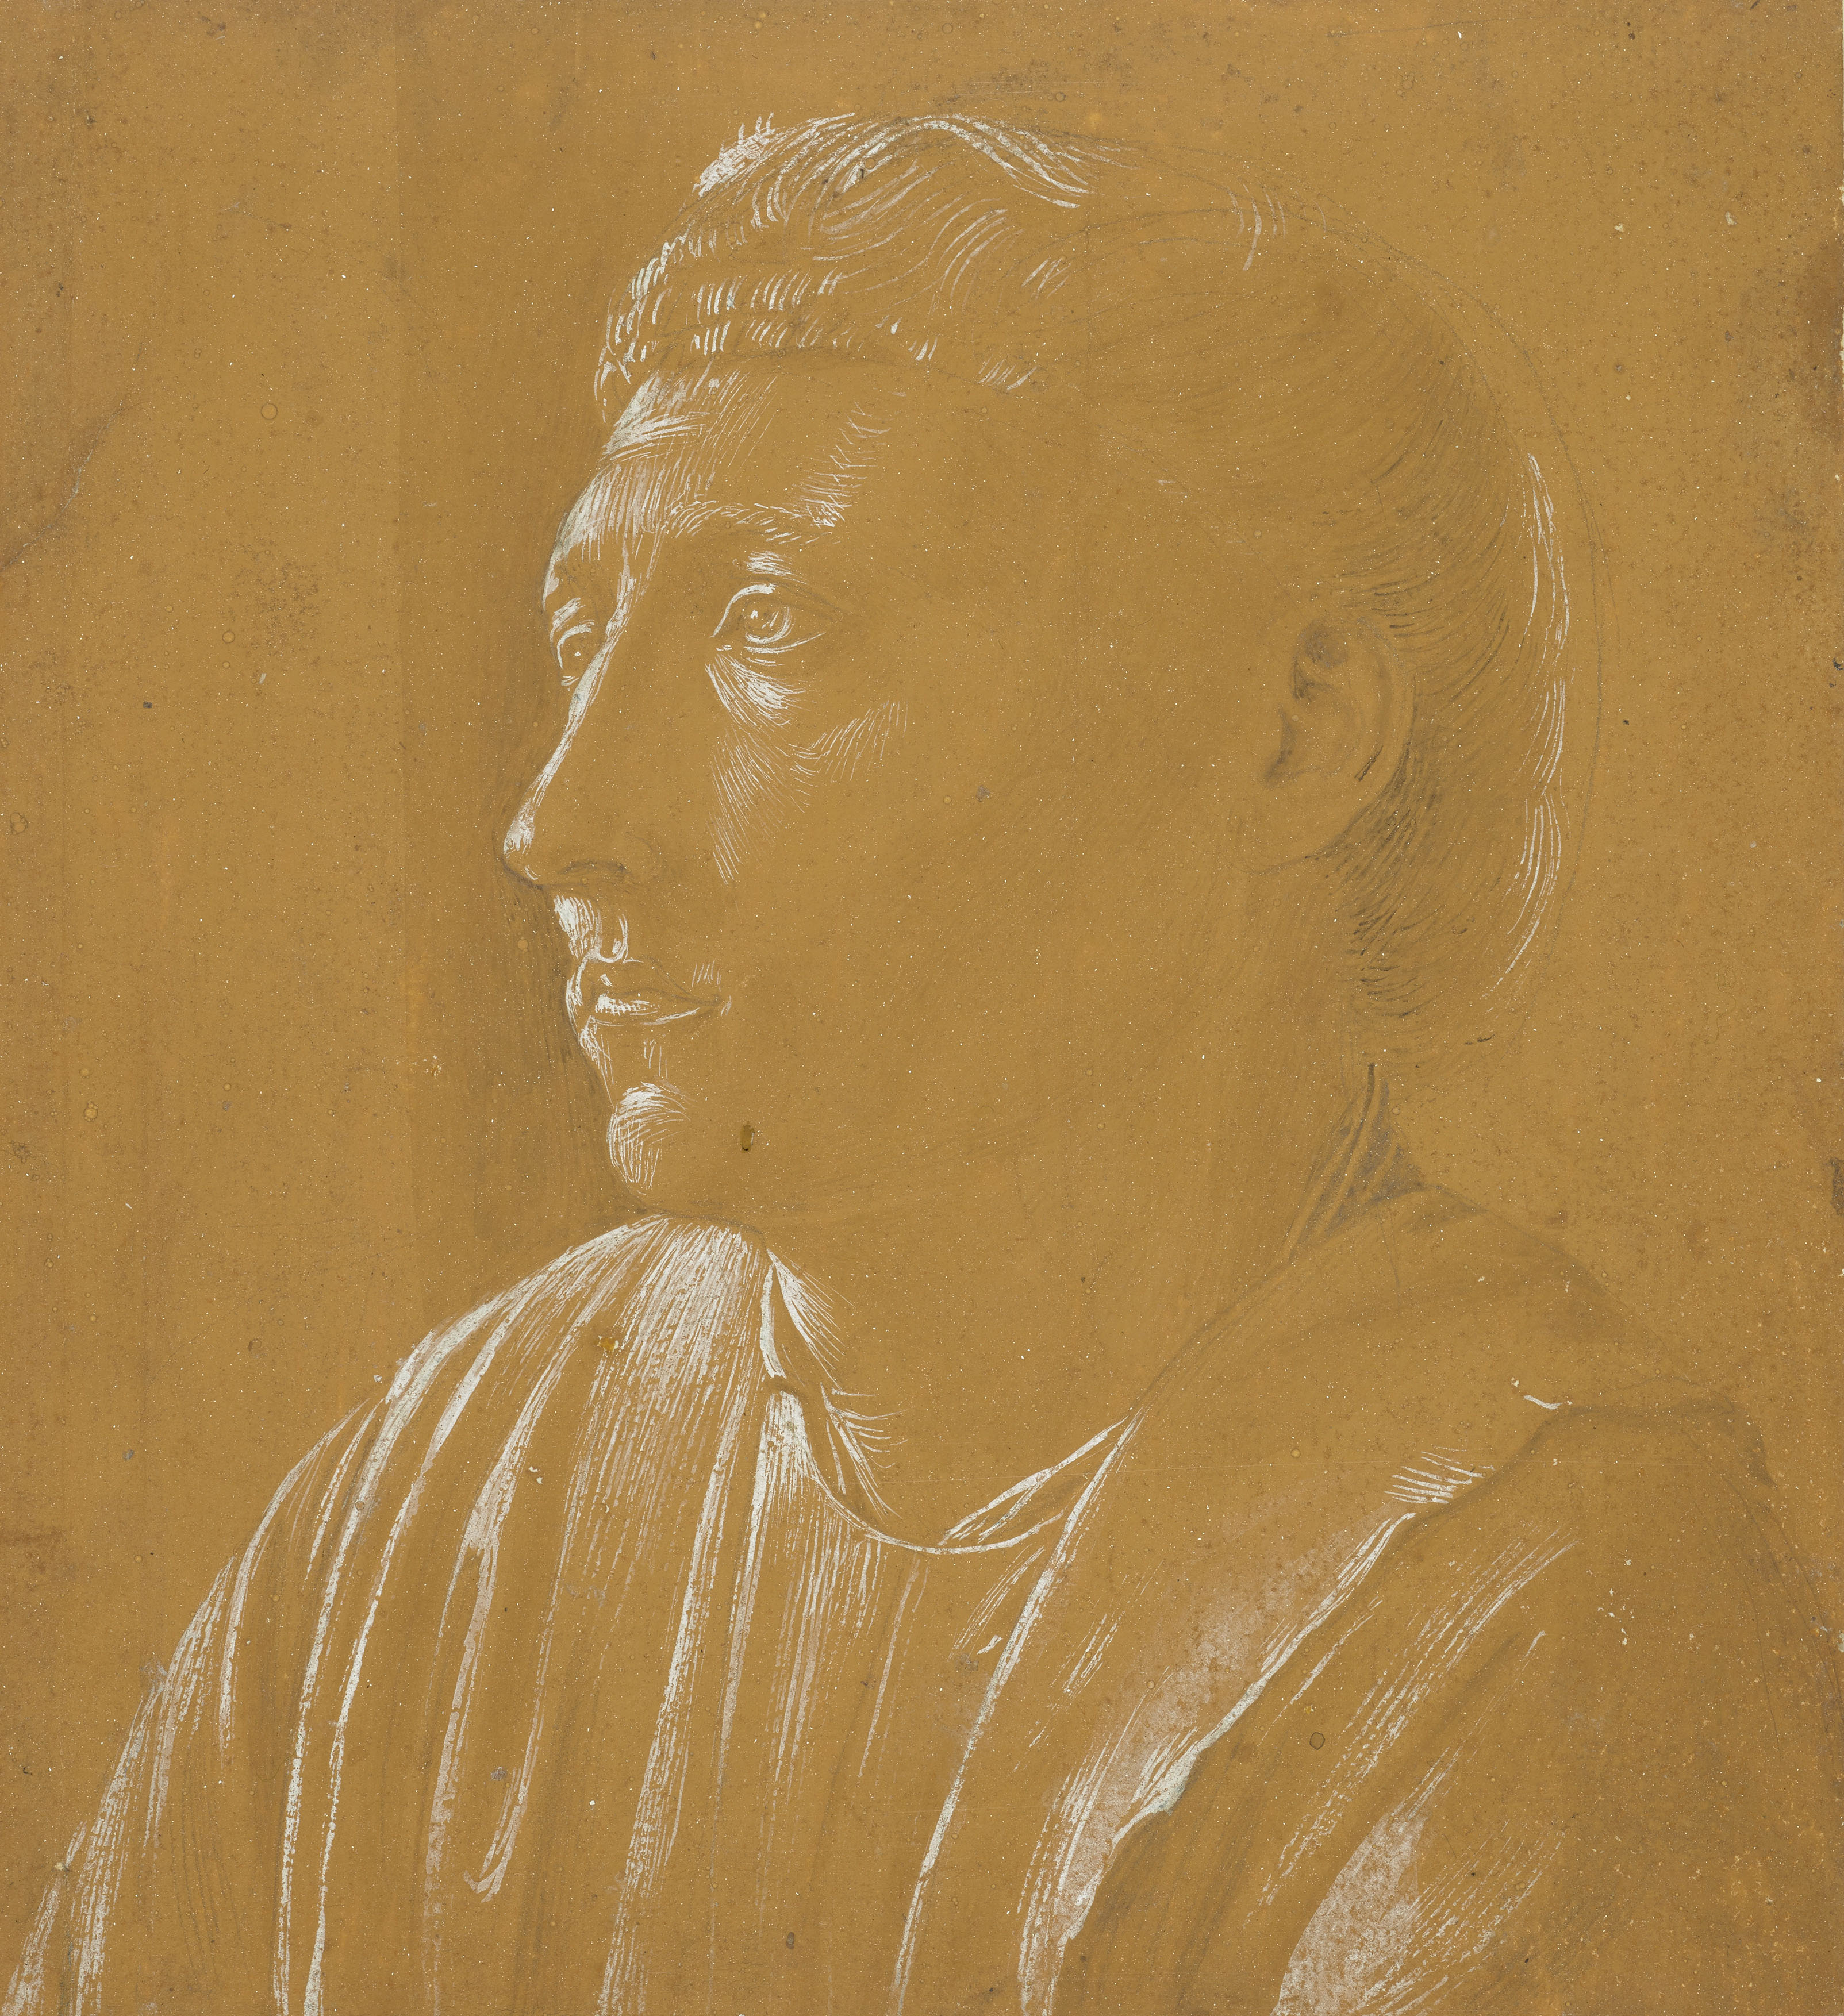 Drawing in white of a man's head on brown paper